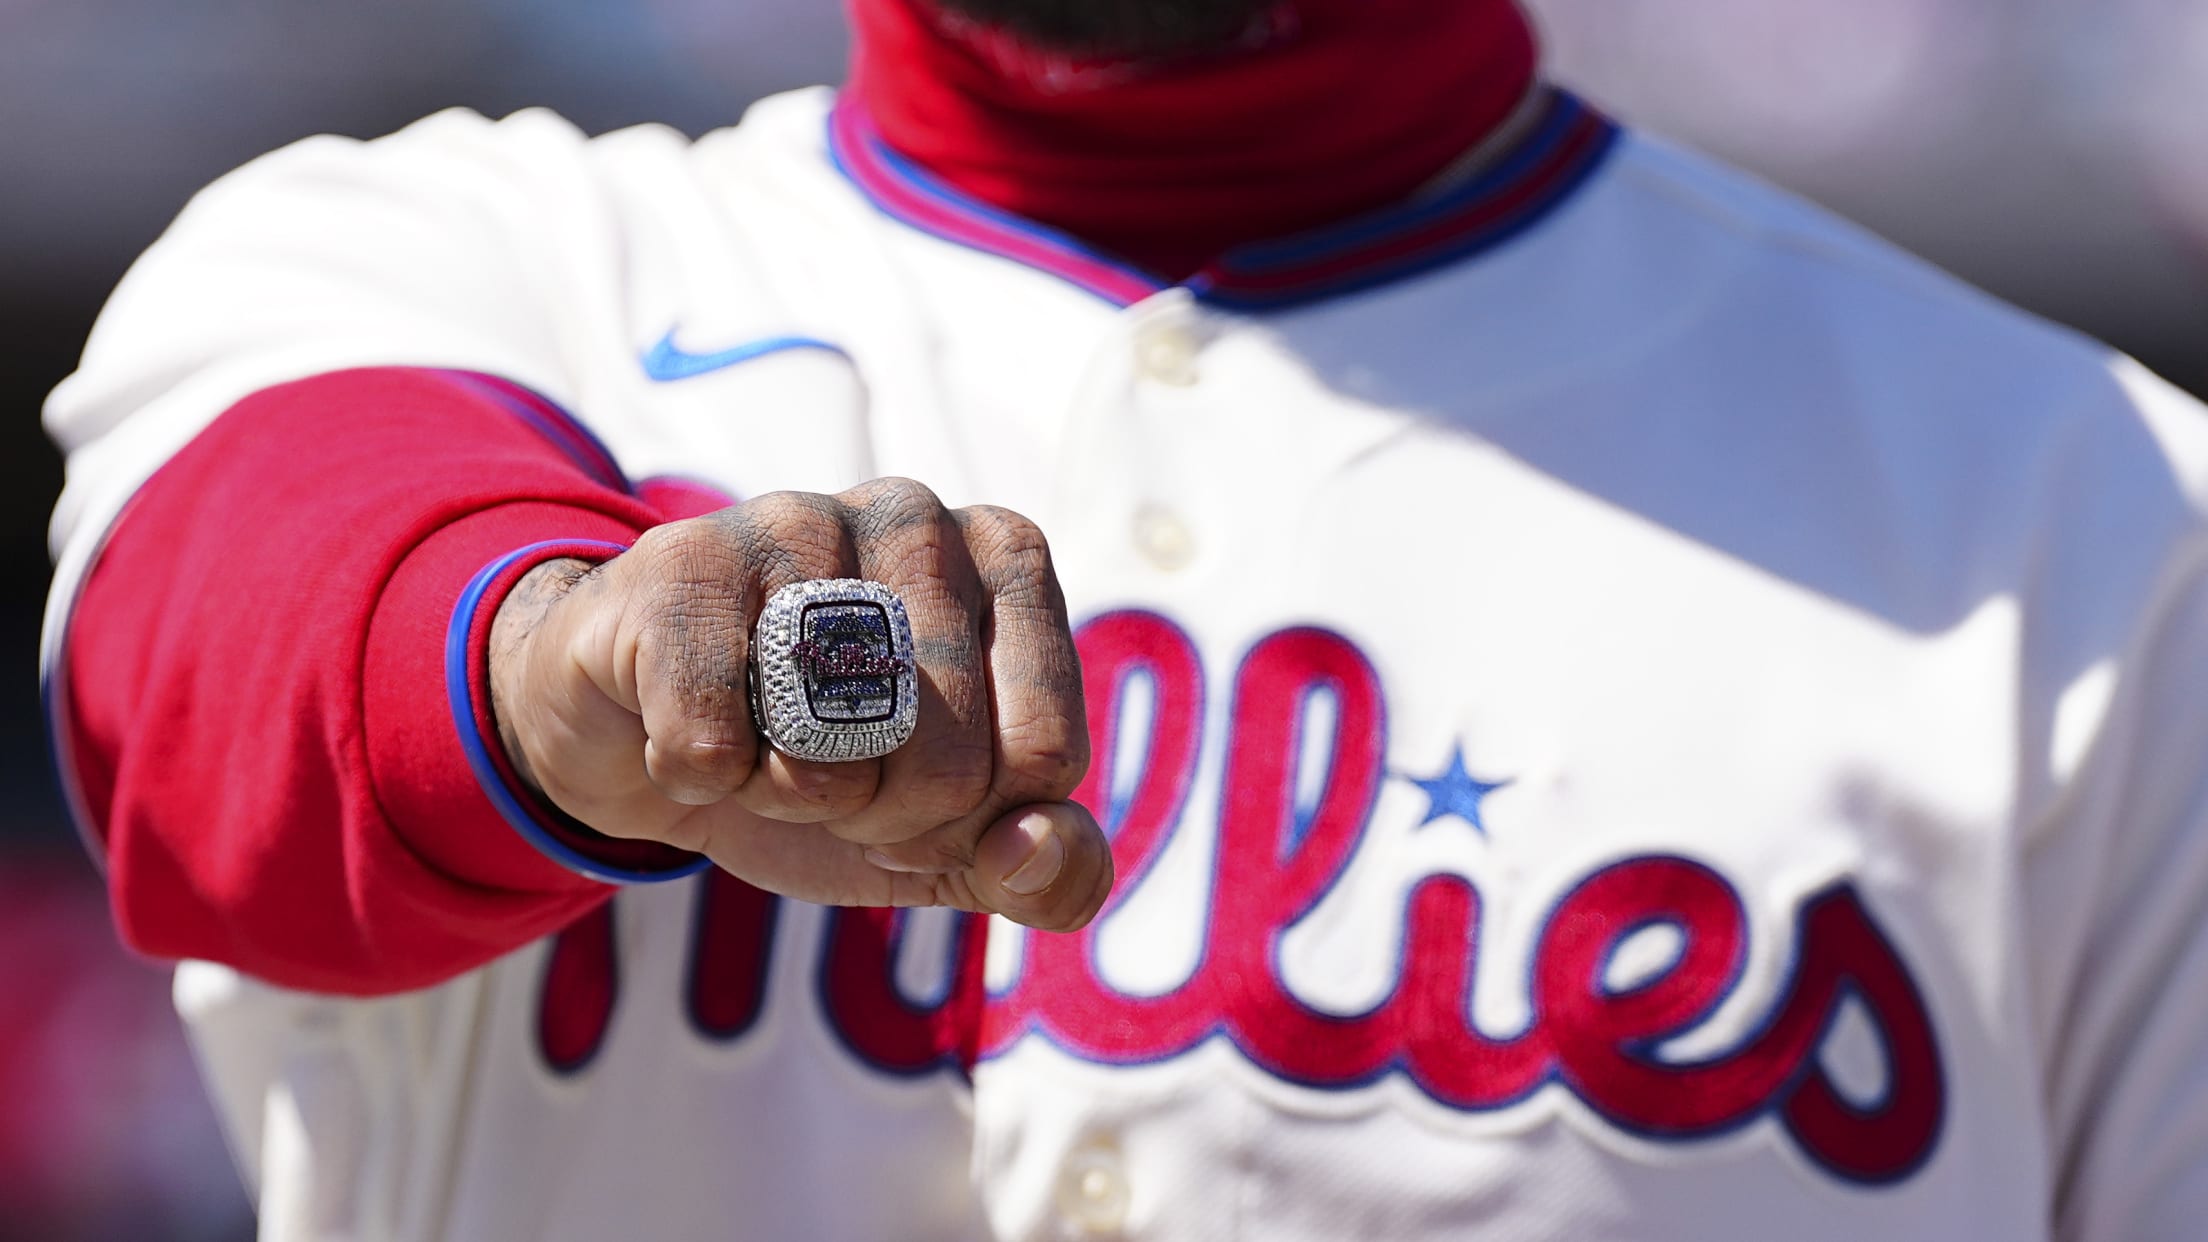 Phillies' National League Championship culminates with ring ceremony